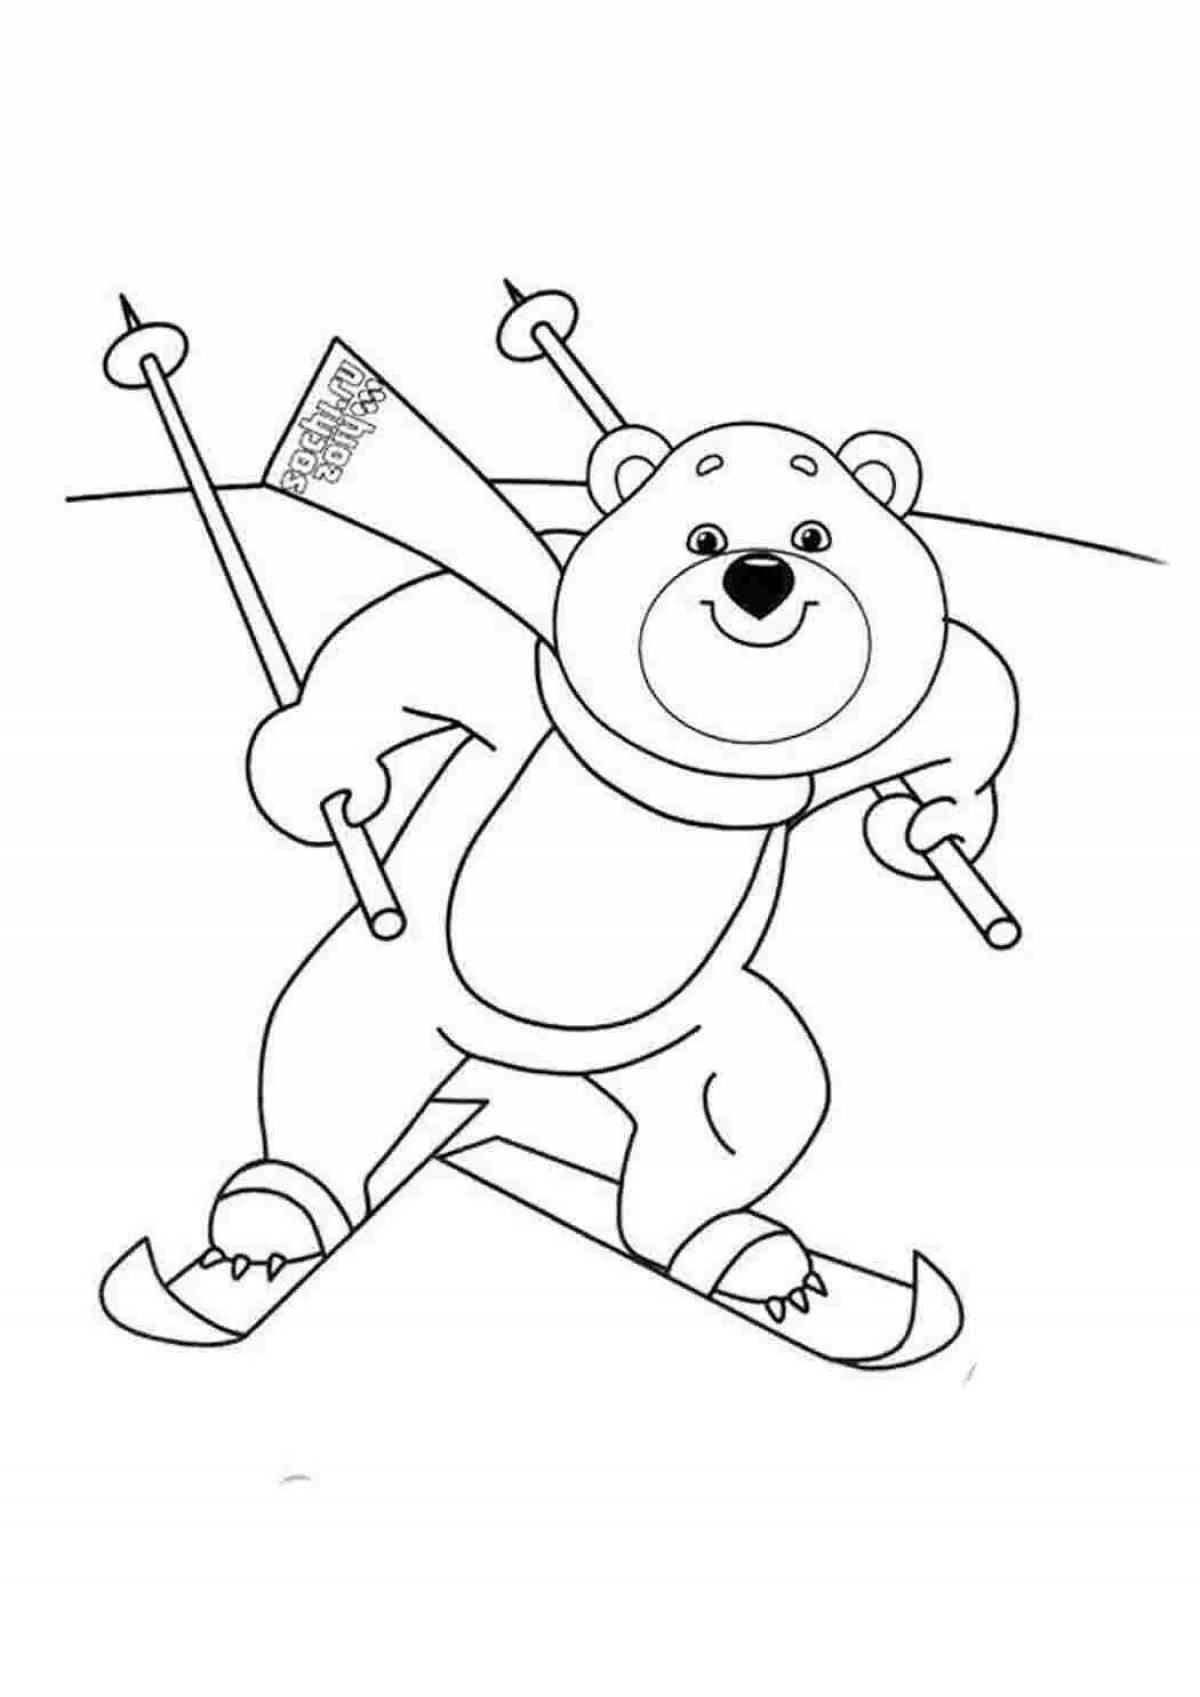 Great coloring book for children's olympic sports